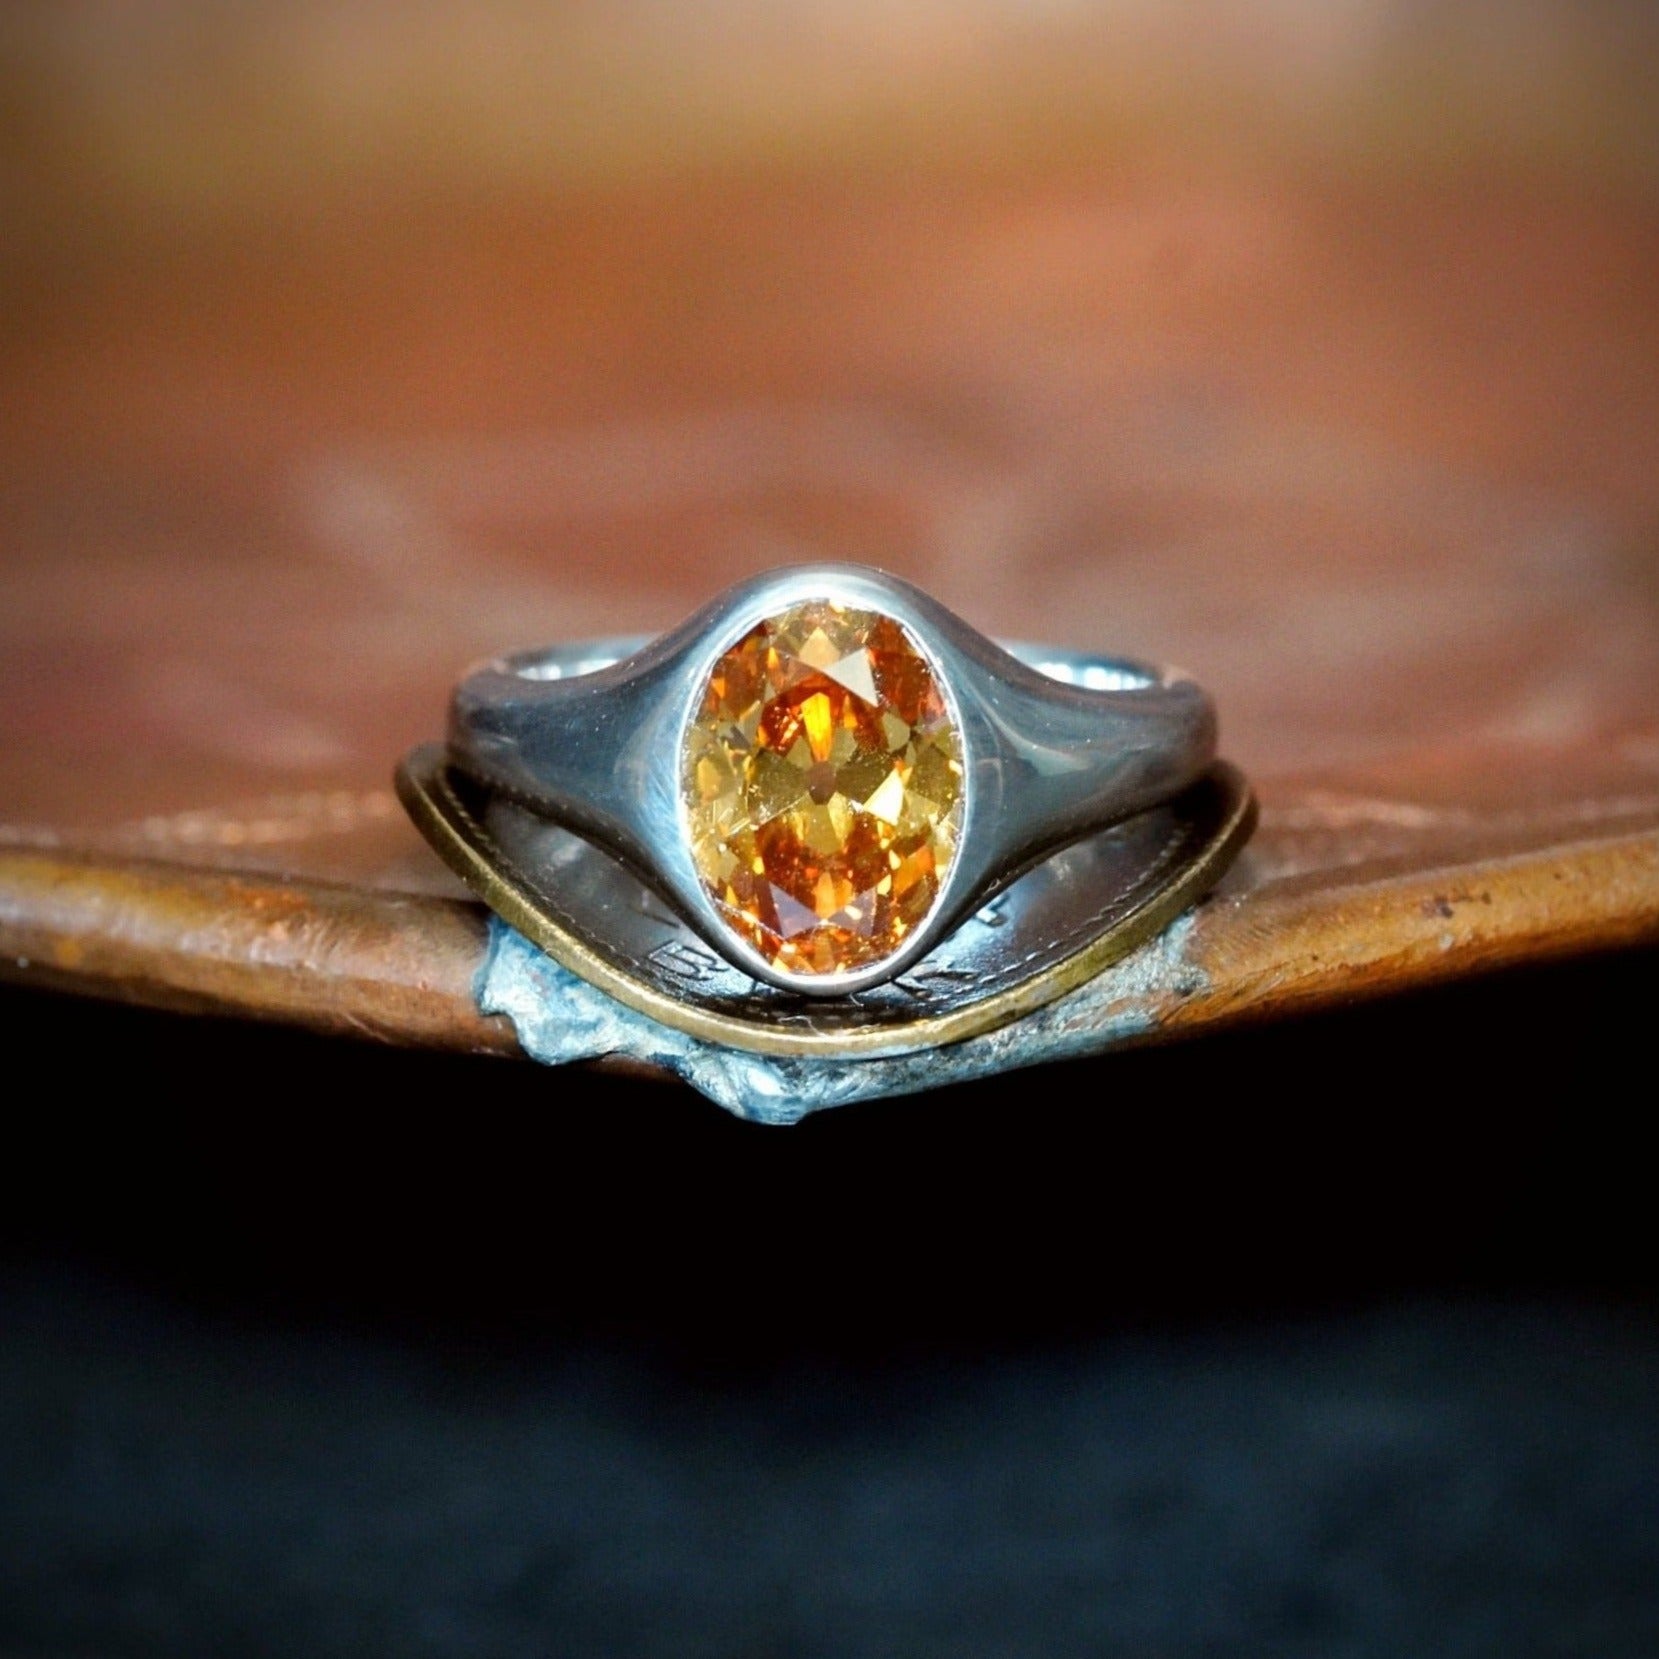 Amber-Hued 2.10 Carat Oval Diamond Ring: A Victorian-Inspired Piece of Art